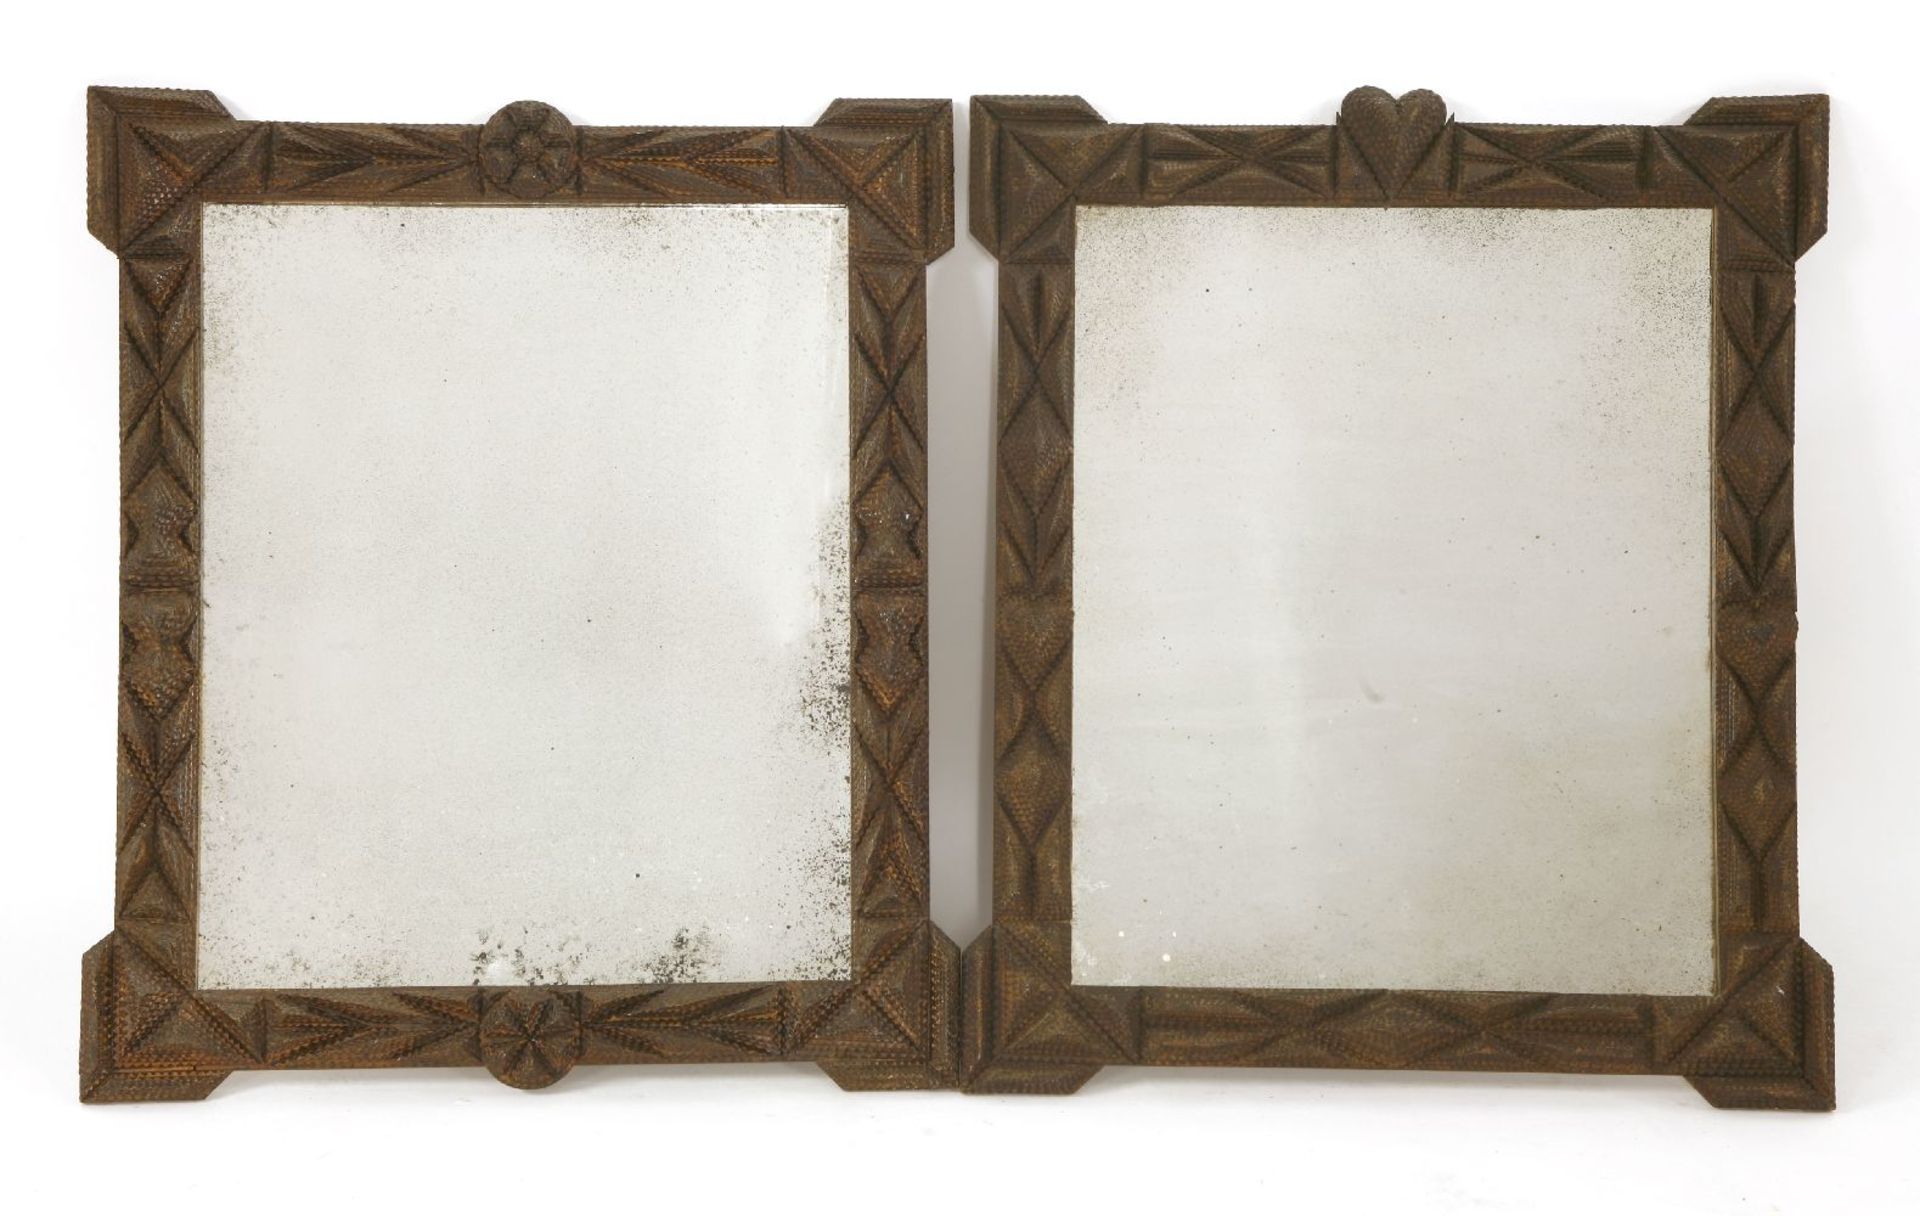 A pair of French carved and stained tramp art mirrors,late 19th century/early 20th century, each